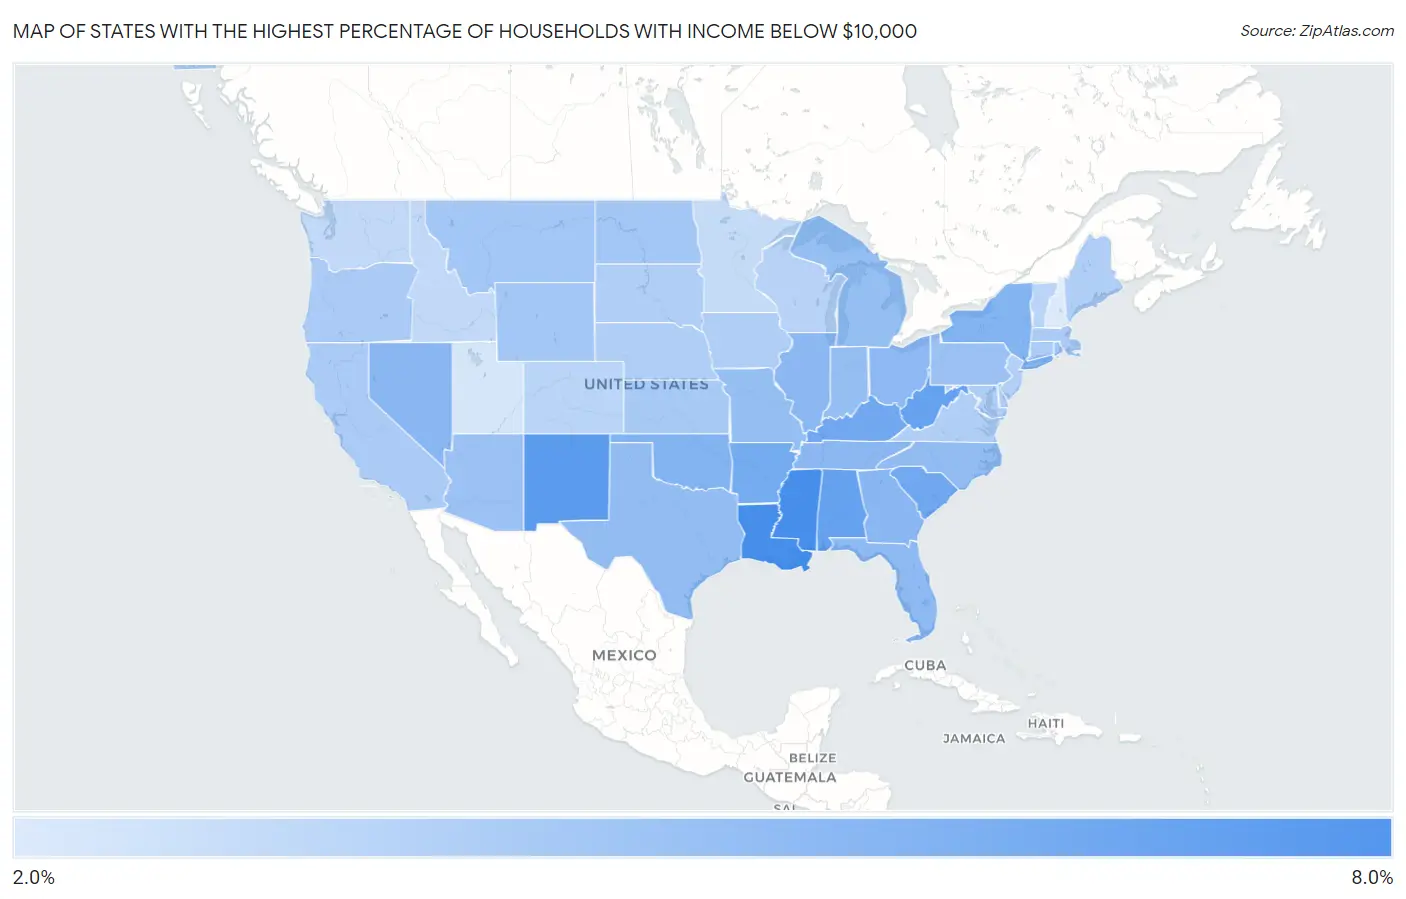 States with the Highest Percentage of Households with Income Below $10,000 in the United States Map